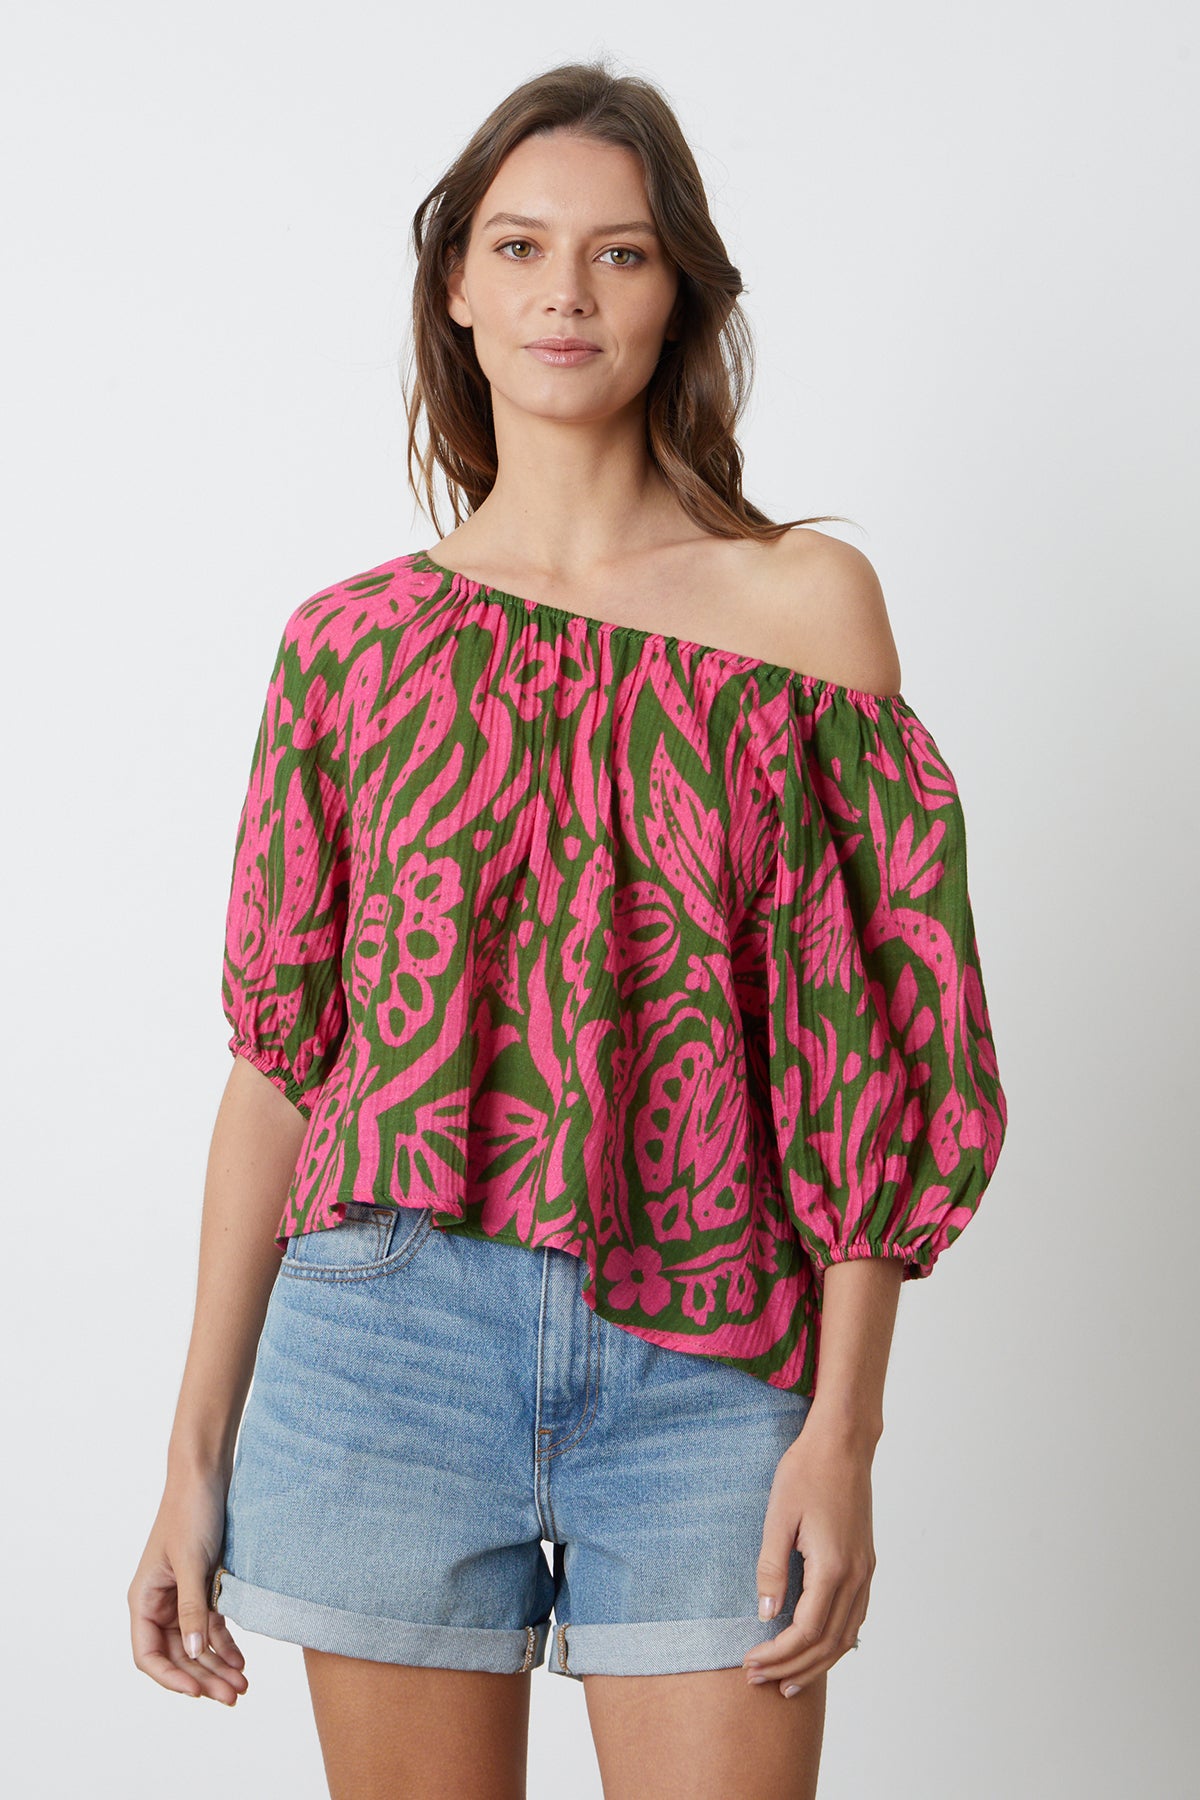 A model wearing a Velvet by Graham & Spencer CANDICE PRINTED COTTON GAUZE TOP in bold pink and green print off shoulder with denim shorts front-26577386602689